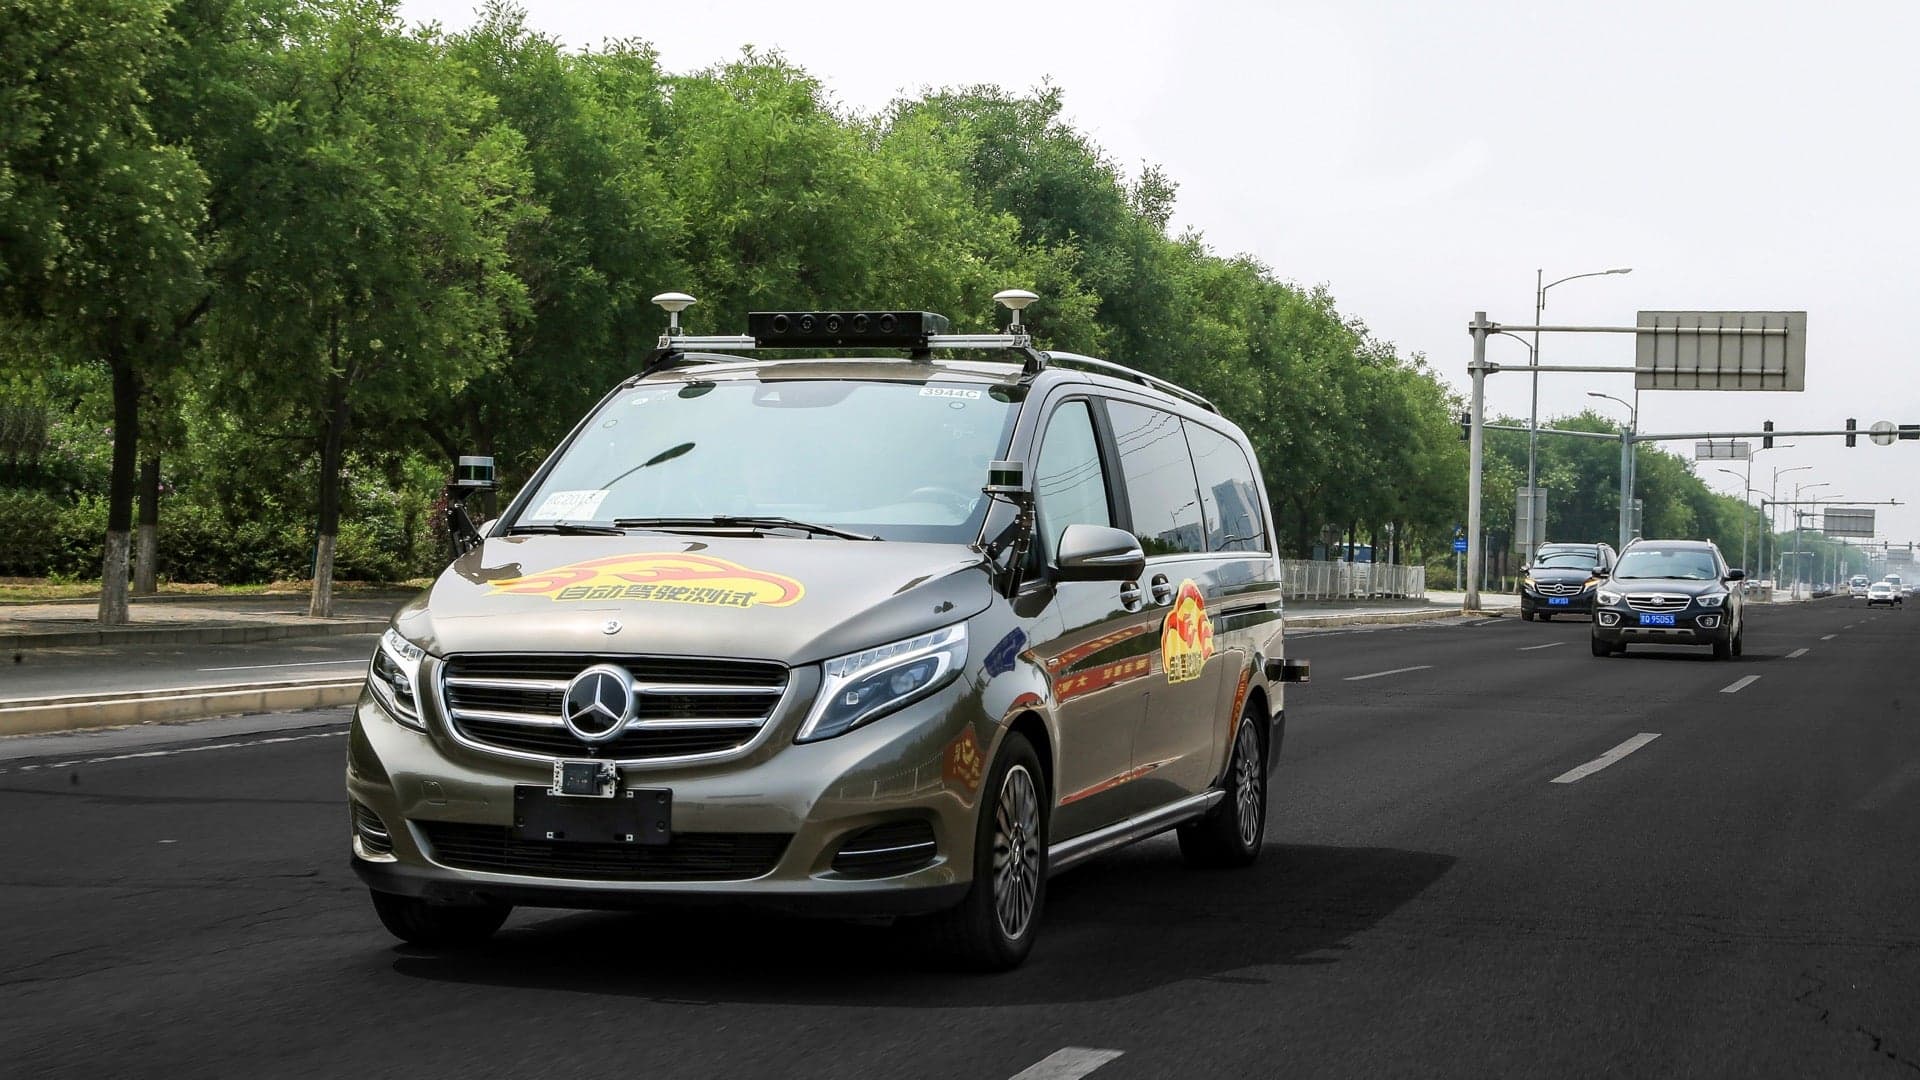 Daimler Authorized to Test ‘Highly-Automated Driving’ in Beijing